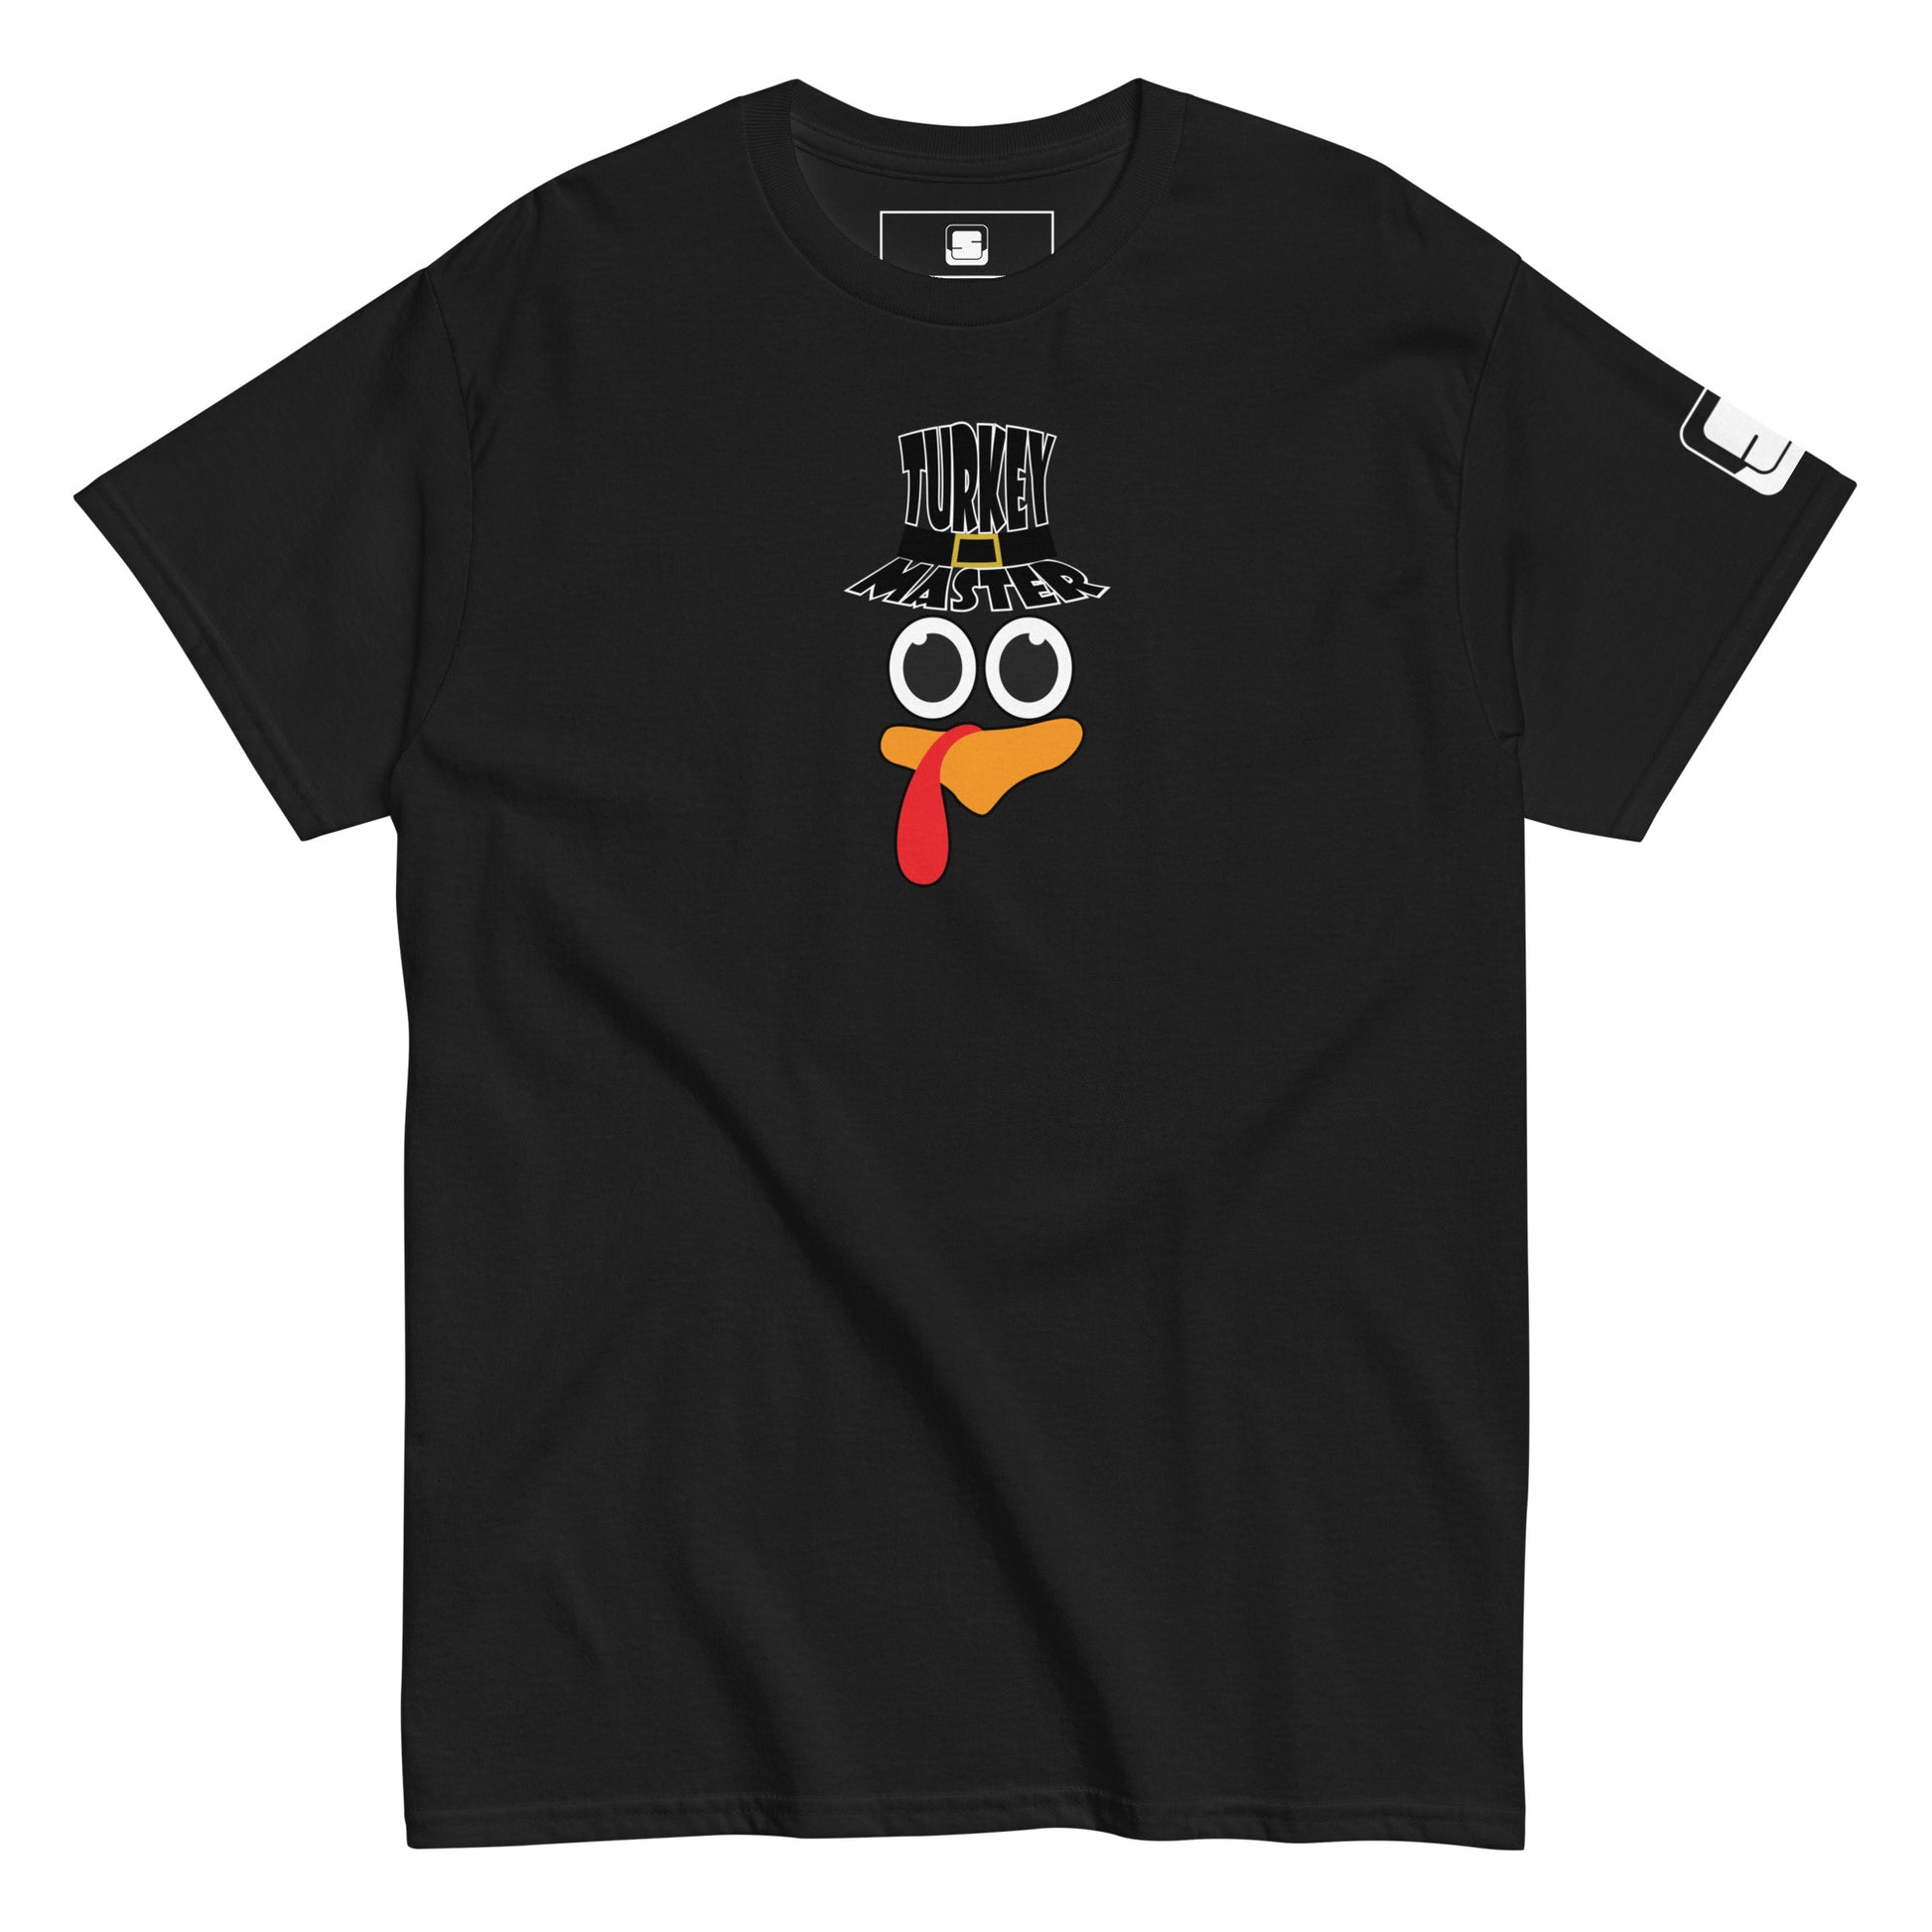 A black t-shirt featuring a playful graphic design of a turkey face with eyes, an orange beak, and a red snood. Above the face, the text reads "TURKEY MASTER" in bold, stylized letters. The text is in the shape of a pilgrims hat. On the left sleeve, there's a rectangular logo patch, adding a unique touch. The shirt is laid out flat, showcasing the entire design clearly.